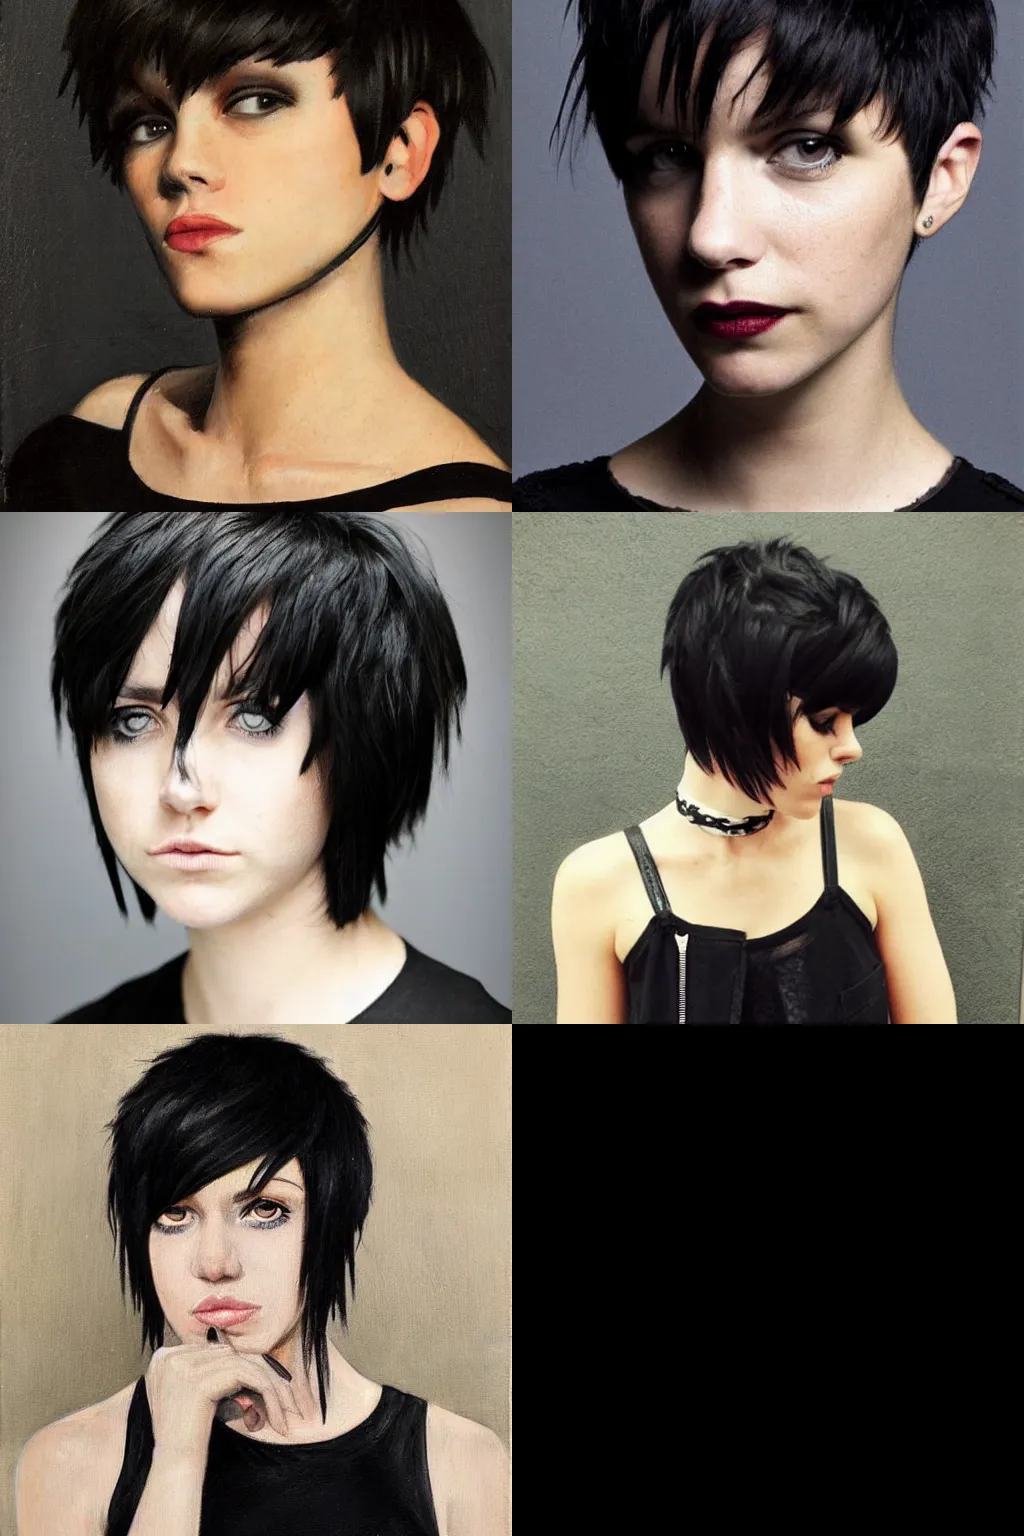 Prompt: an emo portrait by louis anquetin. her hair is dark brown and cut into a short, messy pixie cut. she has a slightly rounded face, with a pointed chin, large entirely - black eyes, and a small nose. she is wearing a black tank top, a black leather jacket, a black knee - length skirt, and a black choker..